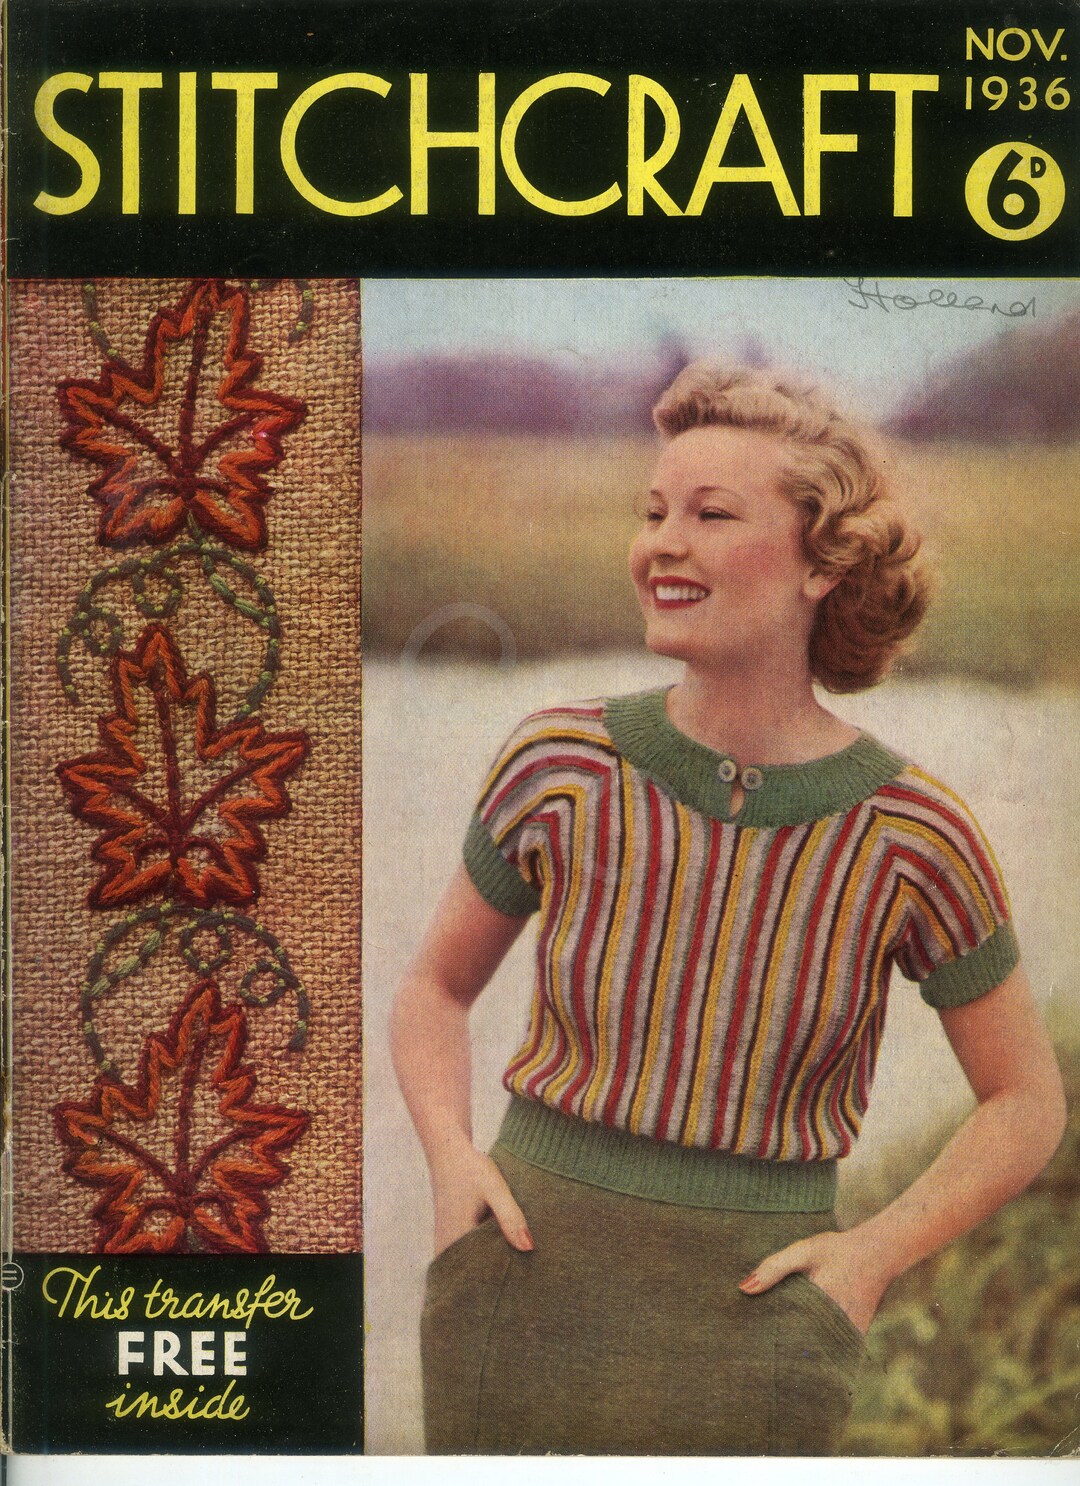 STITCHCRAFT: Entire Nov. 1936 Edition. 44 Pages of Content Including ...